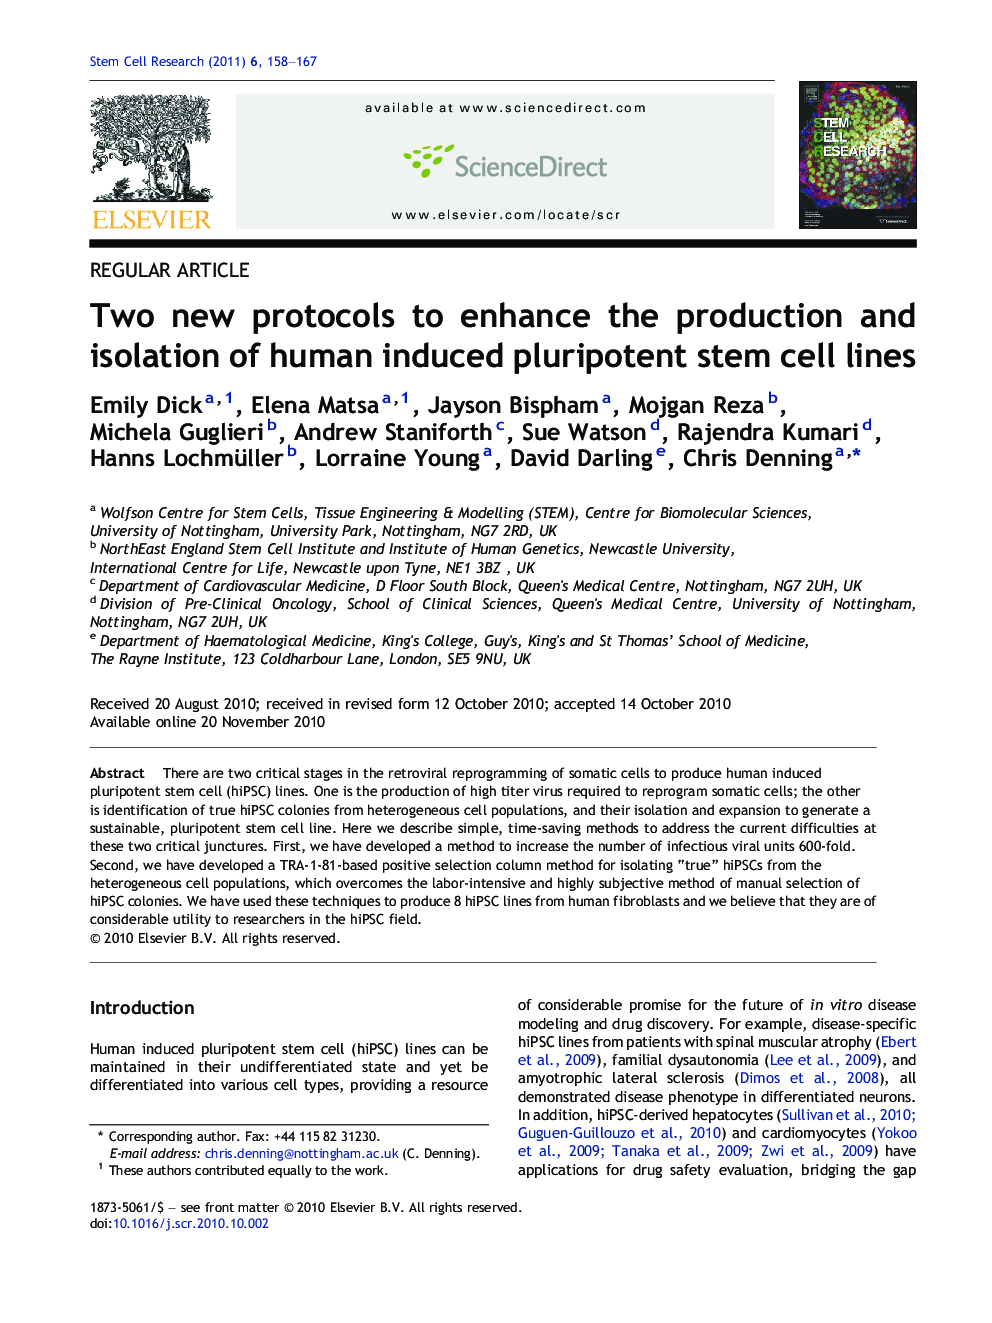 Two new protocols to enhance the production and isolation of human induced pluripotent stem cell lines